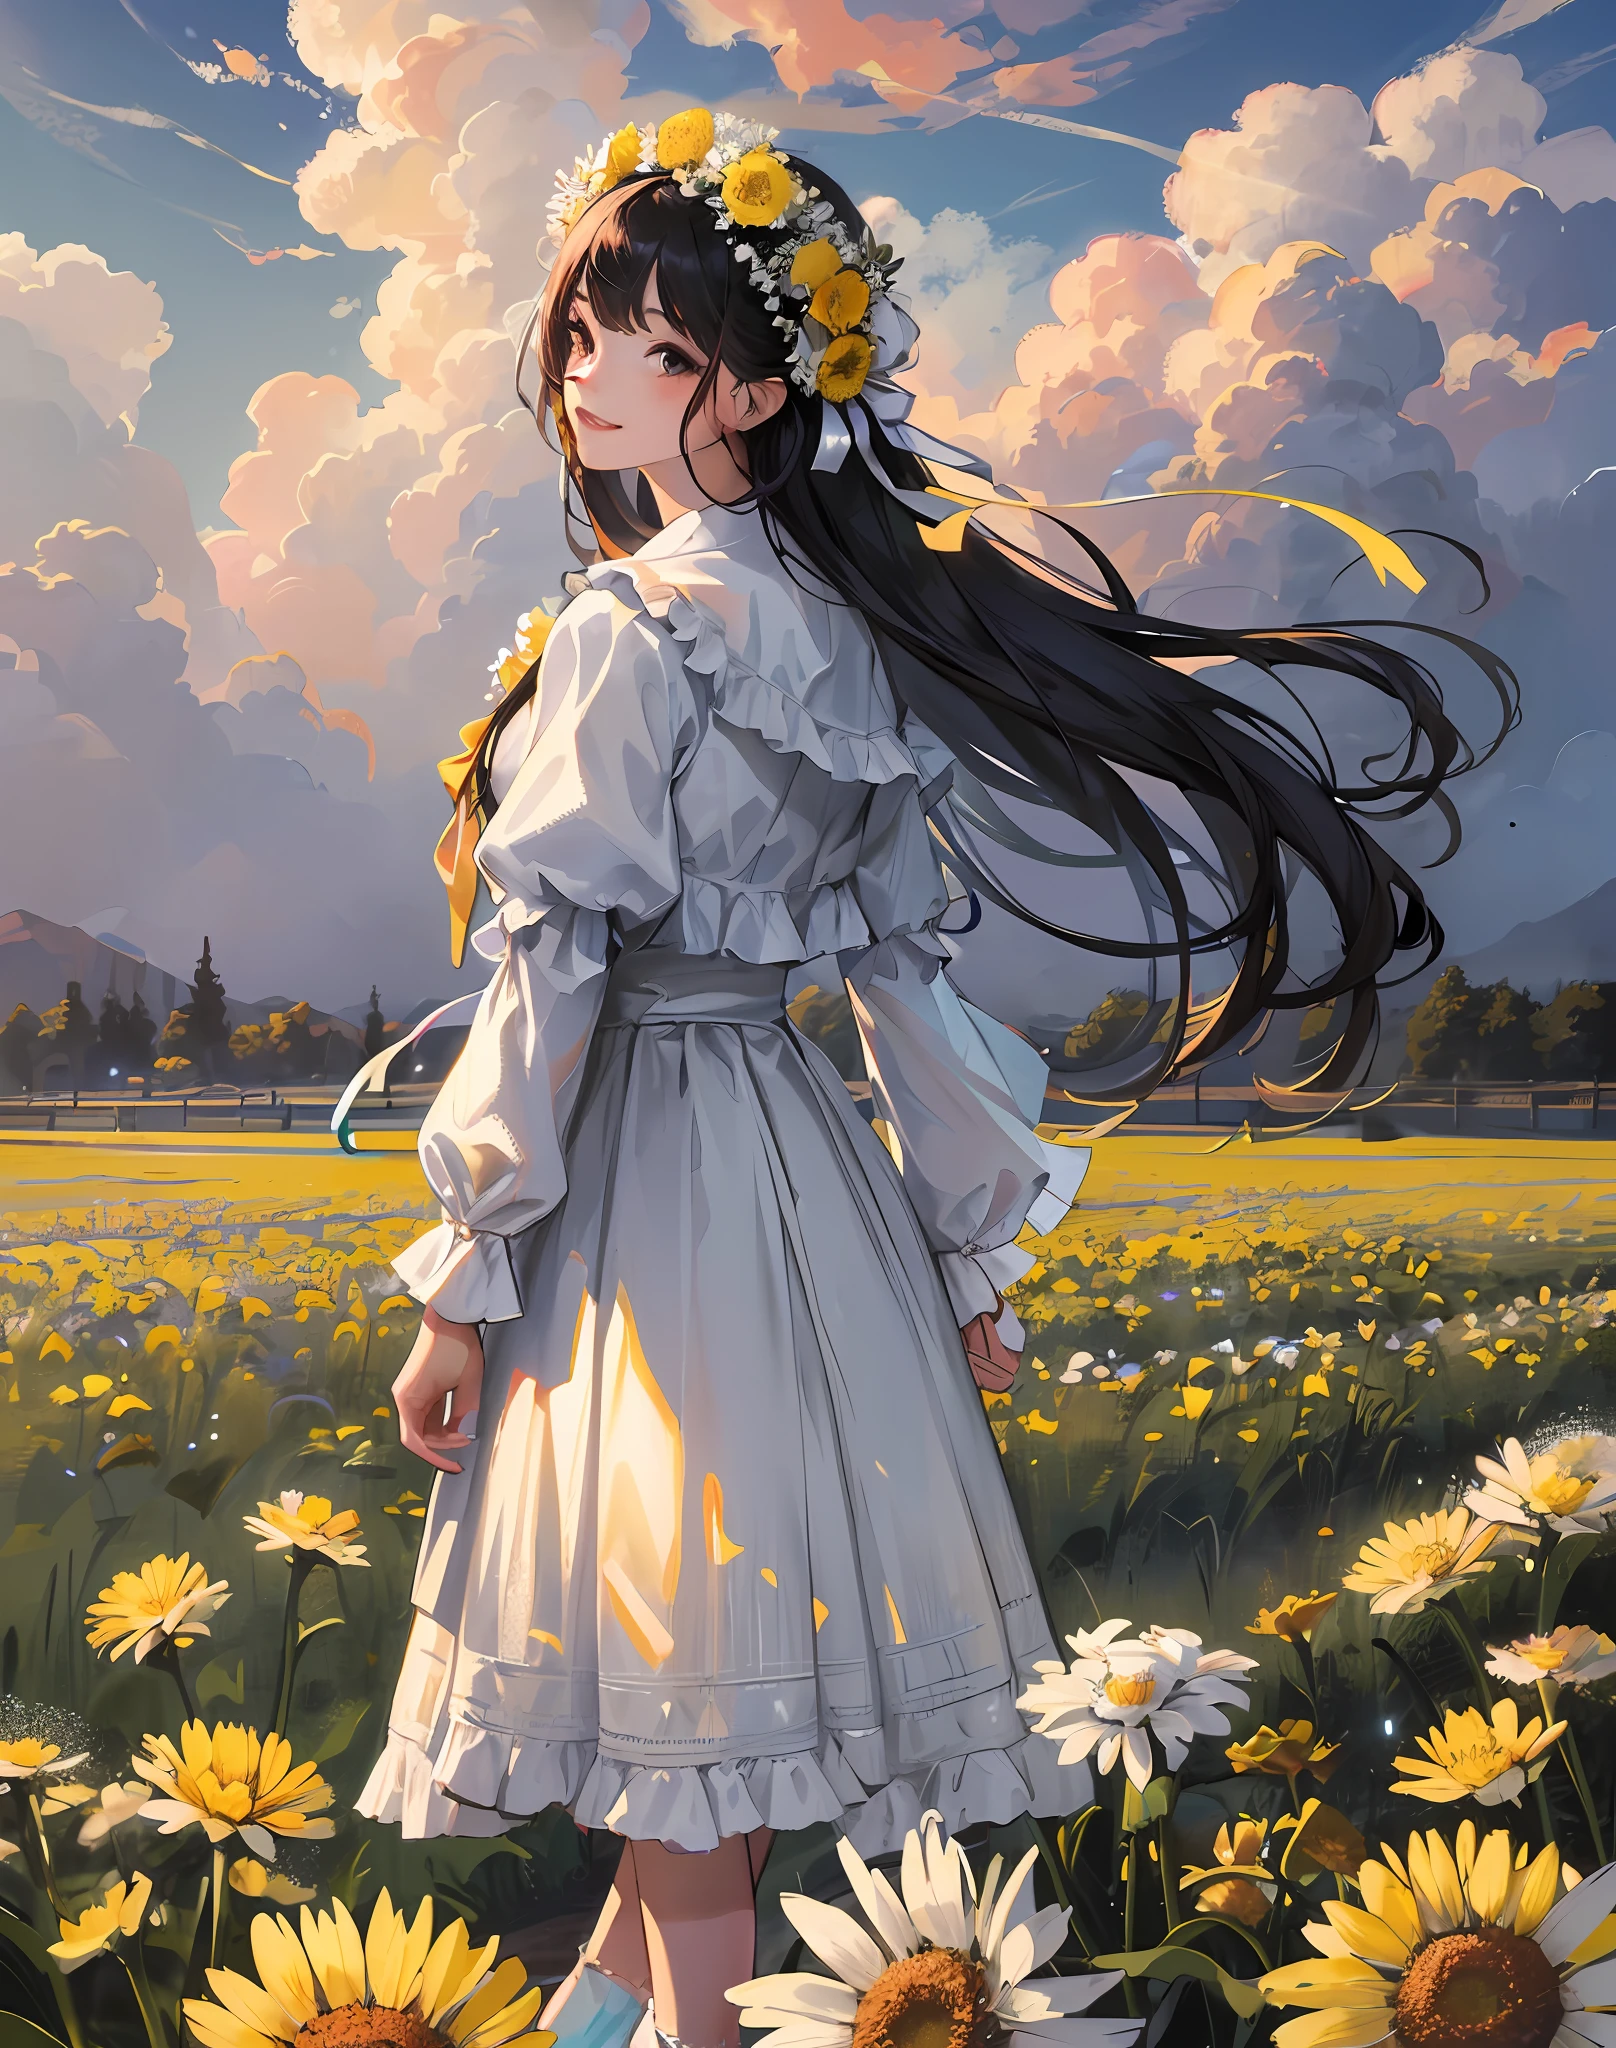 Best quality, masterpiece, high image quality, 1 girl, full body, blush, (attractive smile: 0.8), white clothes, blue pleated skirt, skirt with lace, black hair, ribbon, beautiful face, smile, showing teeth, flowers blooming on both sides of the road, yellow chrysanthemums, red flowers, green grass, spring, white clouds, full body, intense light and shadow, photographic effects, realistic, edge lighting, two-tone lighting, (high detail skin: 1.2), 8k ultra high definition, SLR, soft lighting, high quality, volumetric lighting,Capture, Photo, High Resolution, 4K, 8K,